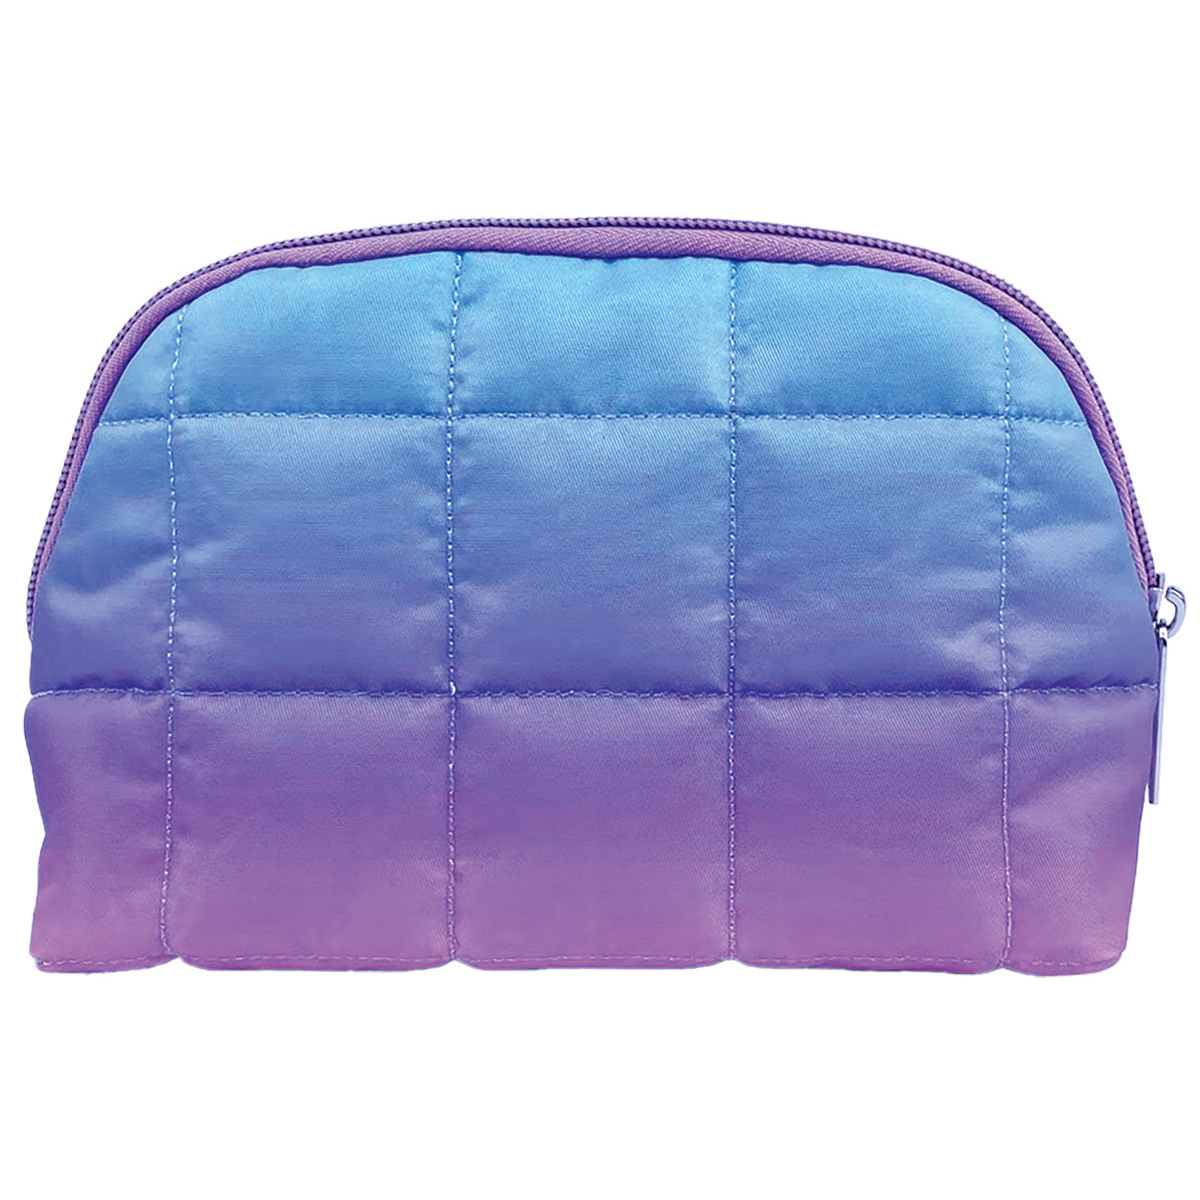 Inter-Vion Pastel Ombre - Quilted Cosmetic Bag, pink-white